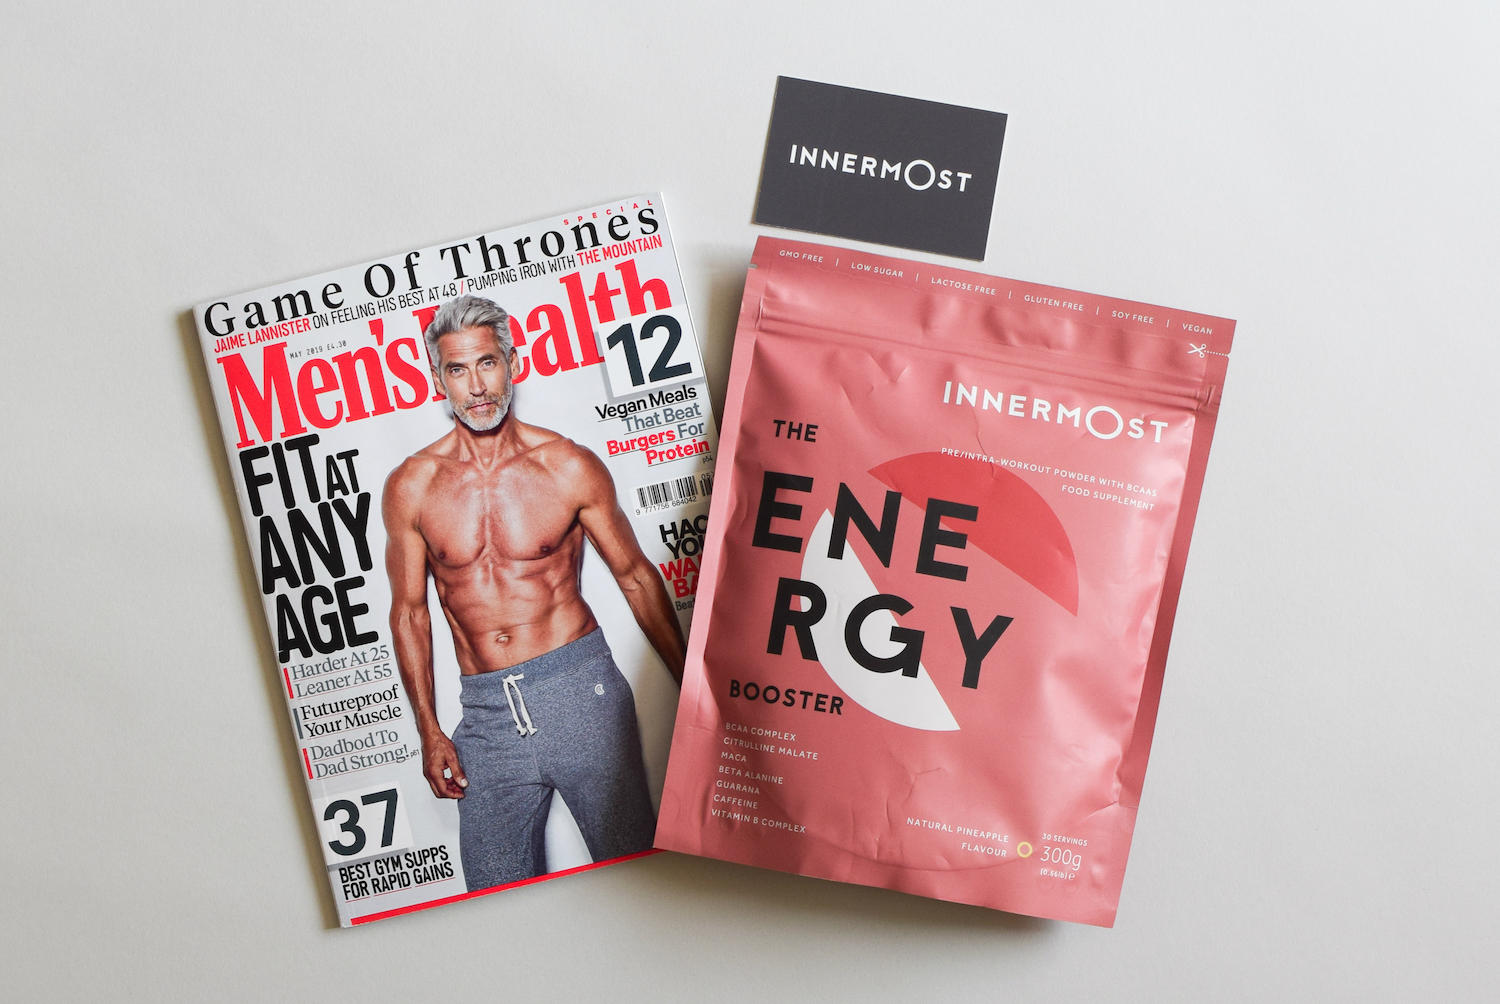 A photo showing a Men's Health magazine, an Innermost business card and an Innermost protein product.